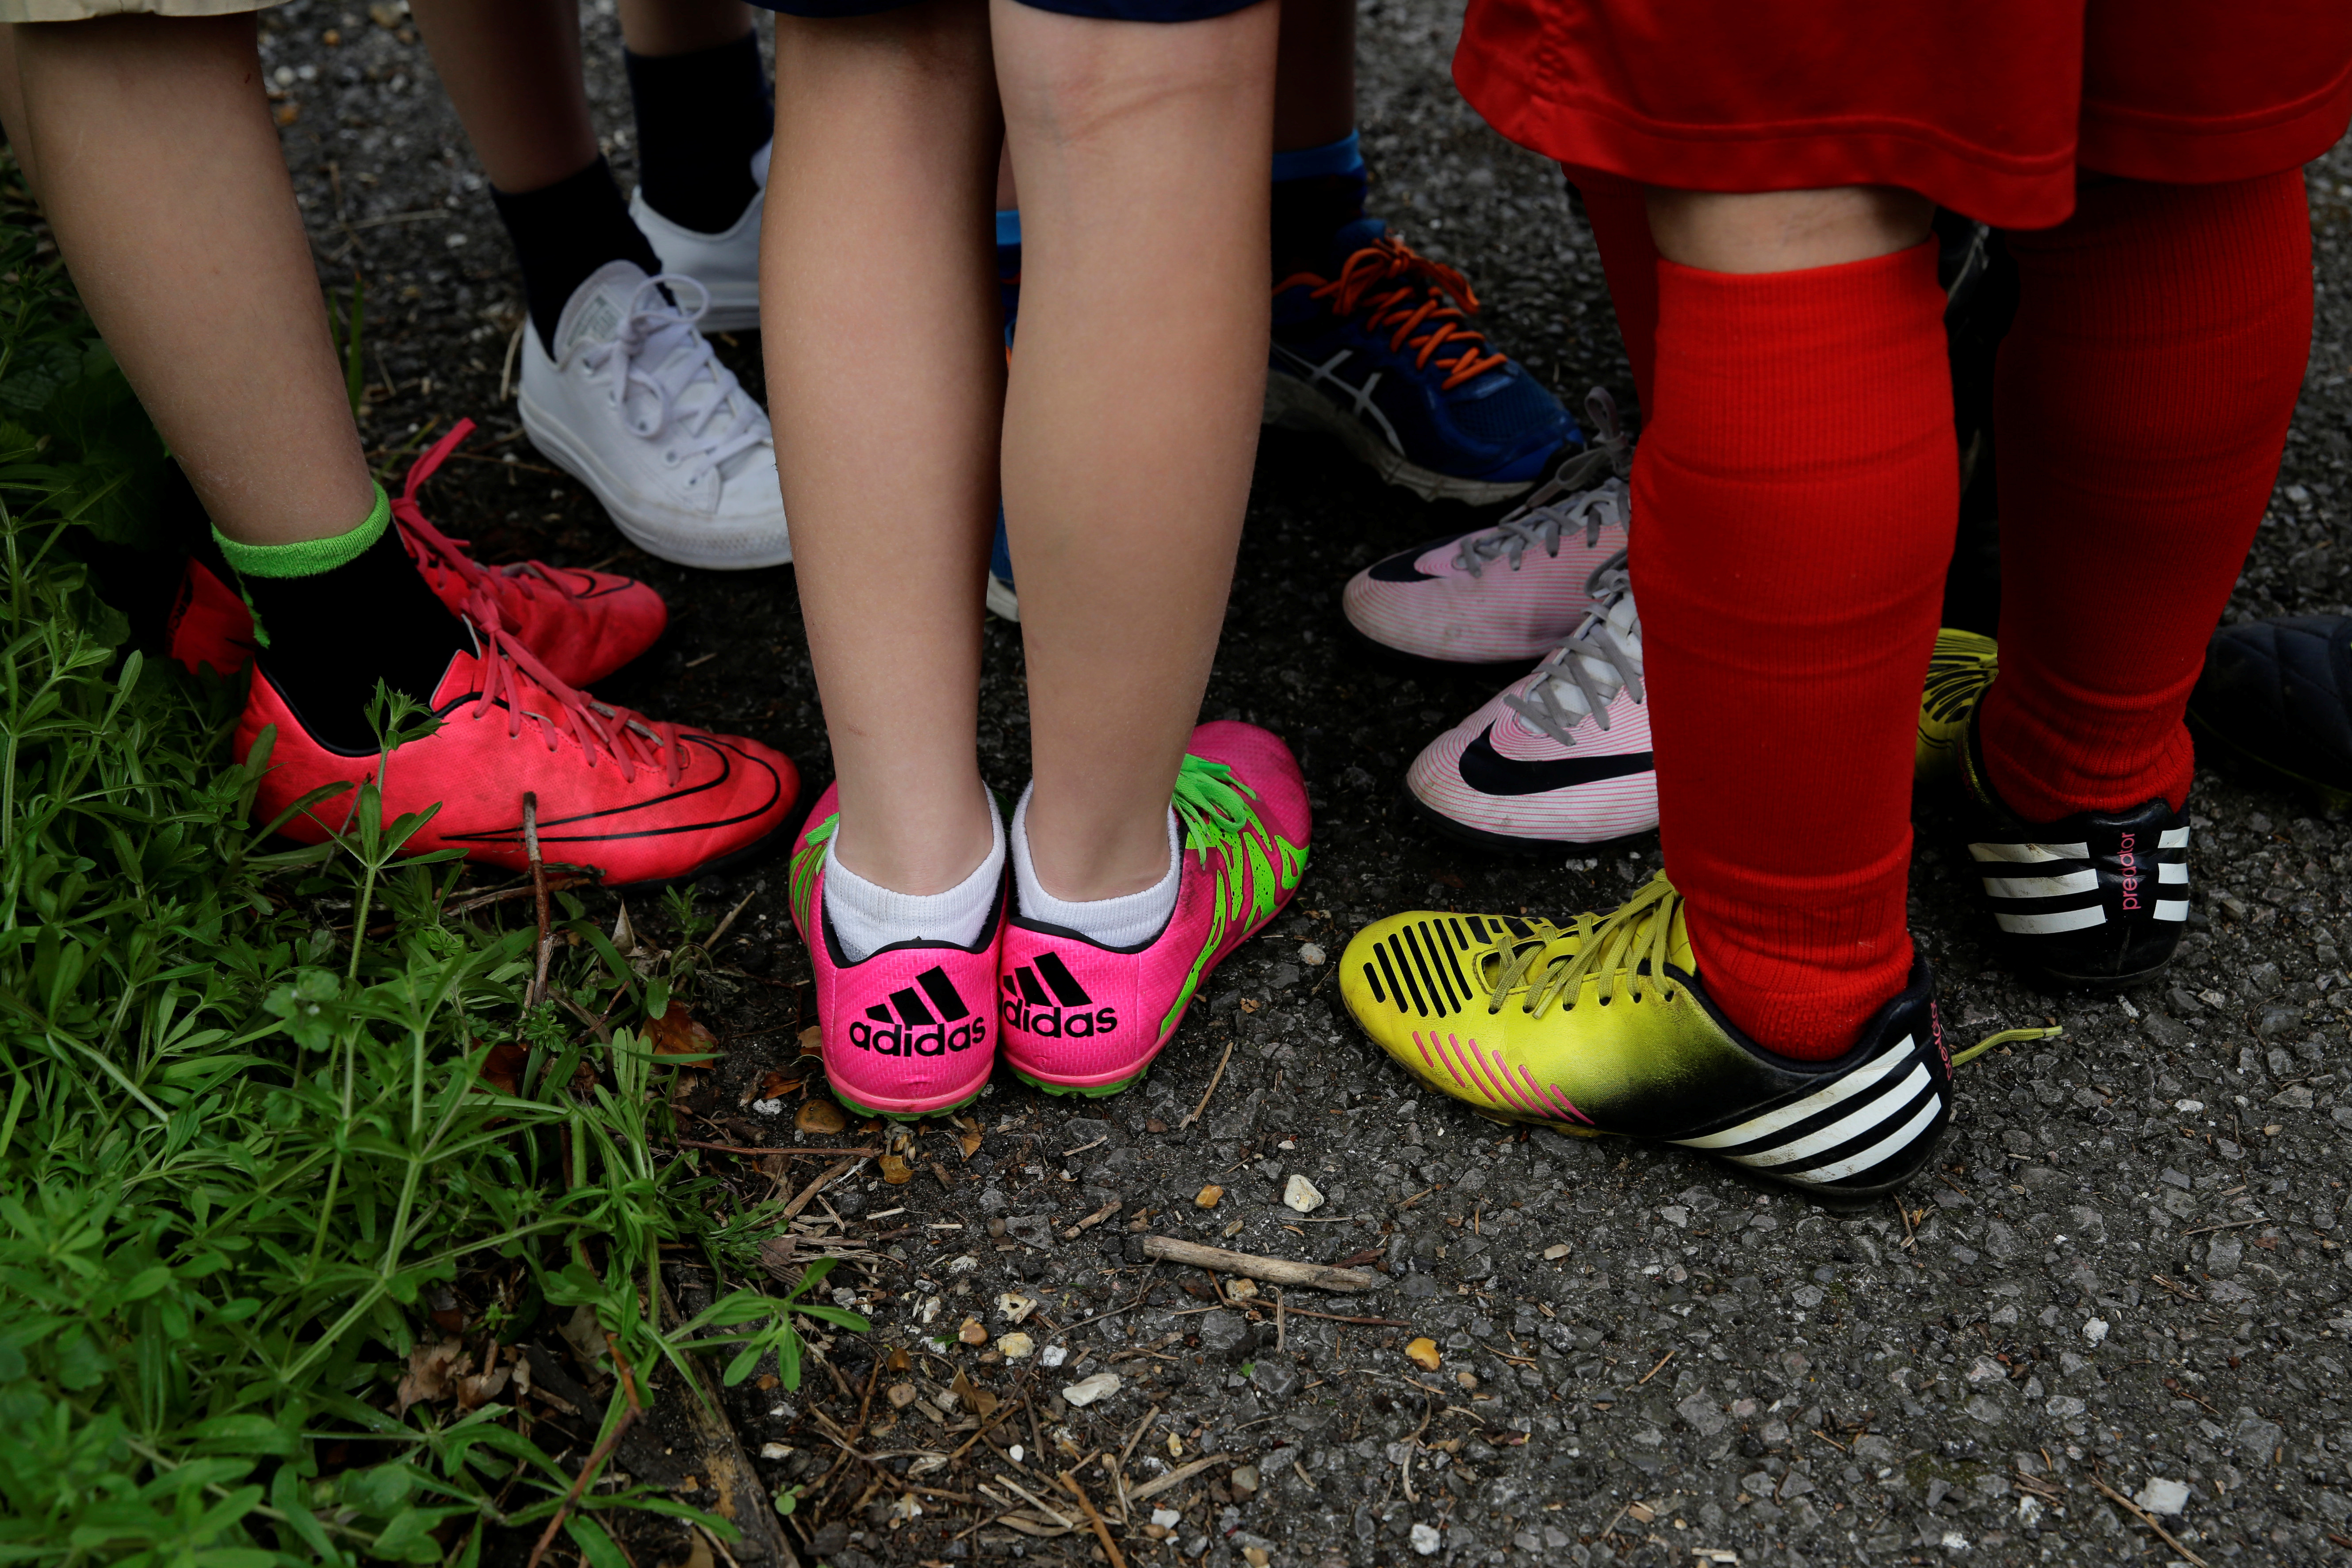 Children wearing Nike and Adidas shoes at a playground